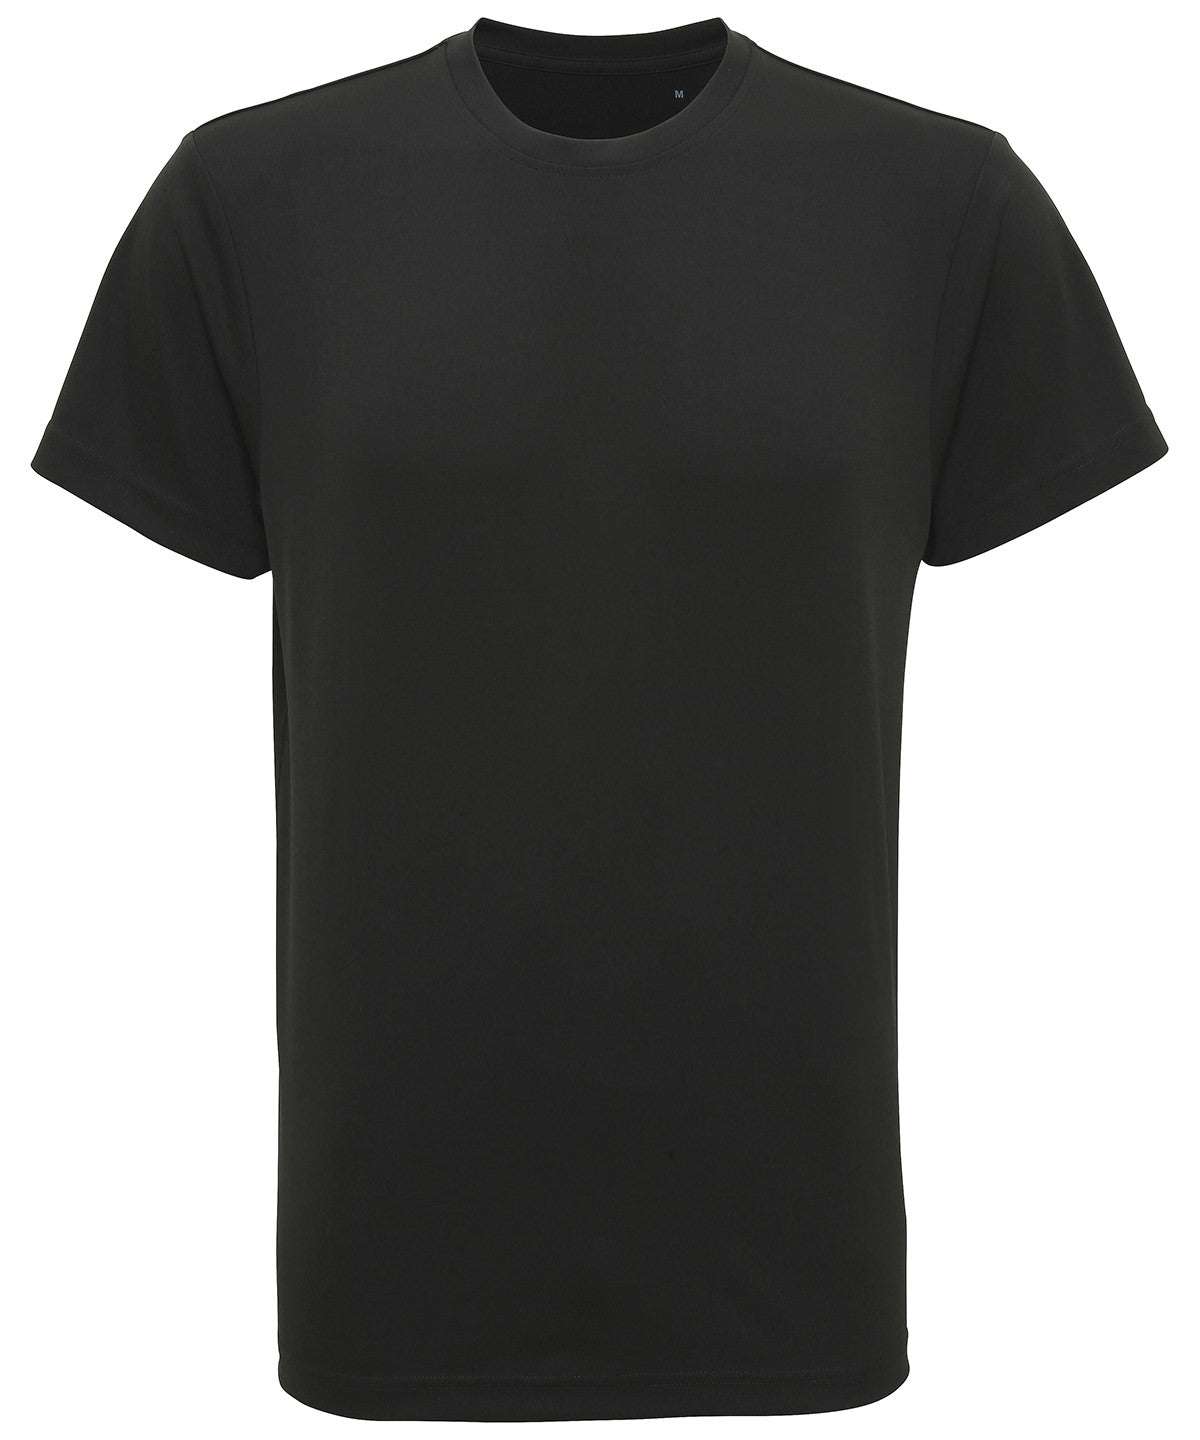 Charcoal - TriDri® performance t-shirt T-Shirts TriDri® Activewear & Performance, Athleisurewear, Back to the Gym, Exclusives, Gymwear, Must Haves, New Colours For 2022, Outdoor Sports, Plus Sizes, Rebrandable, Sports & Leisure, T-Shirts & Vests, Team Sportswear, UPF Protection Schoolwear Centres